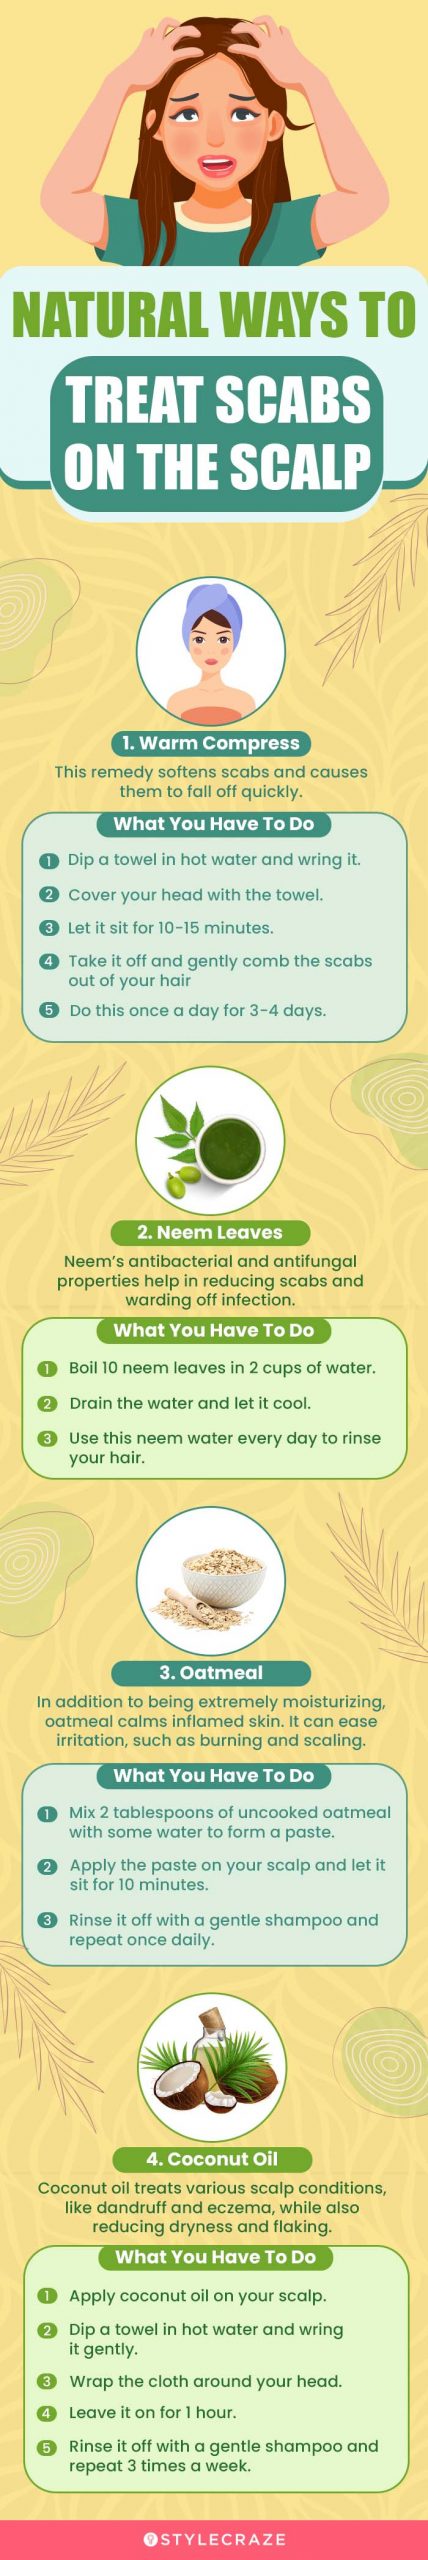 natural ways to treat scabs on the scalp (infographic)